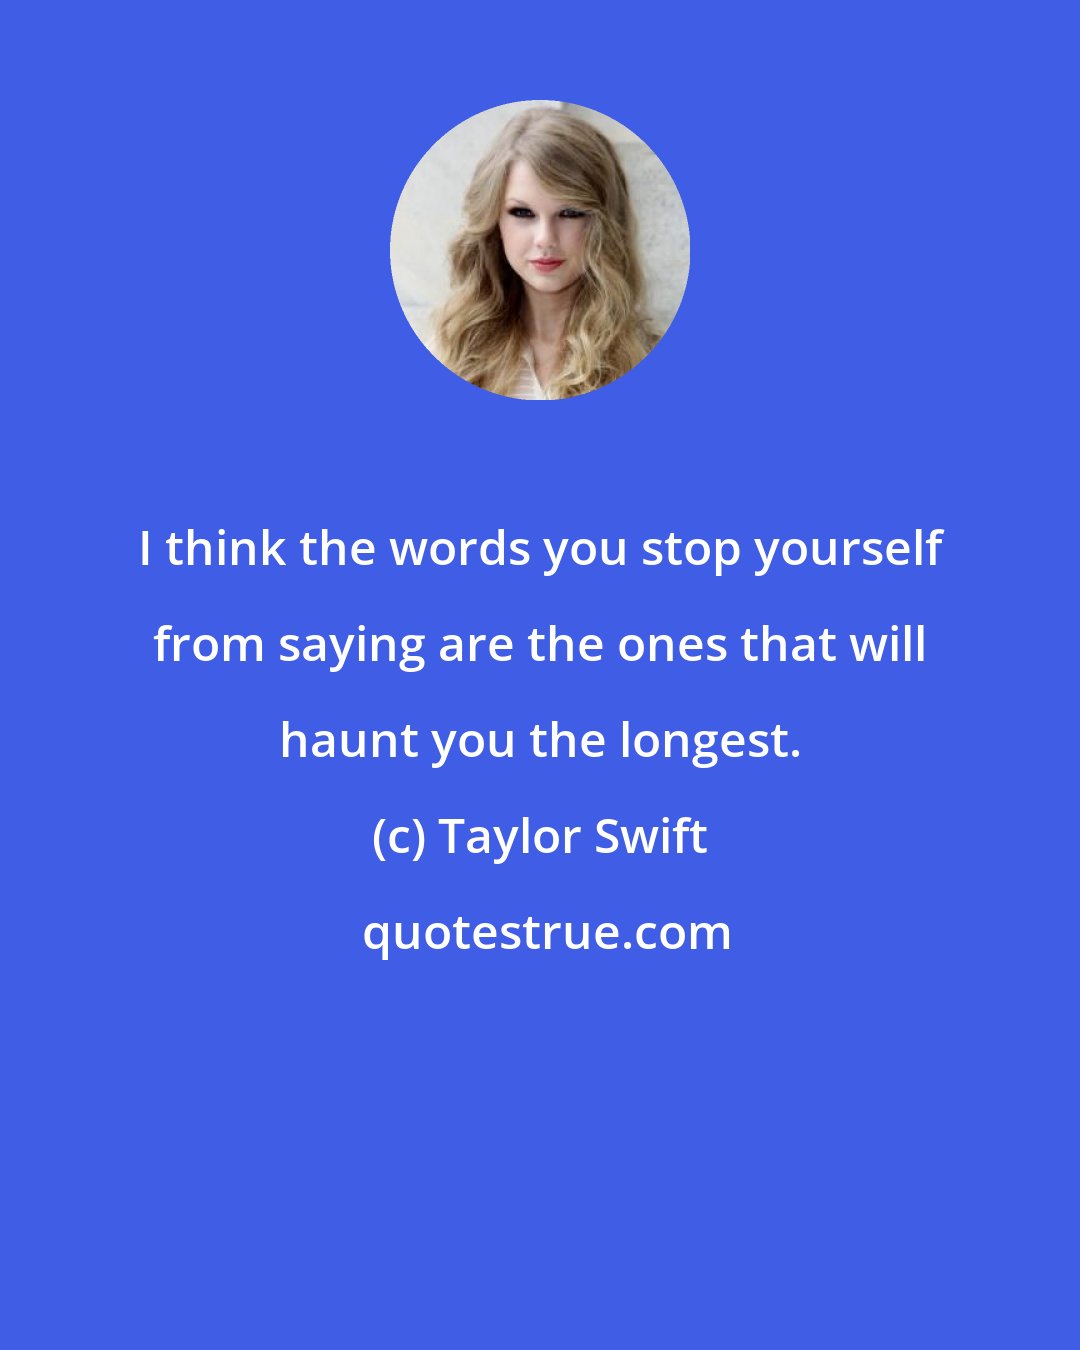 Taylor Swift: I think the words you stop yourself from saying are the ones that will haunt you the longest.